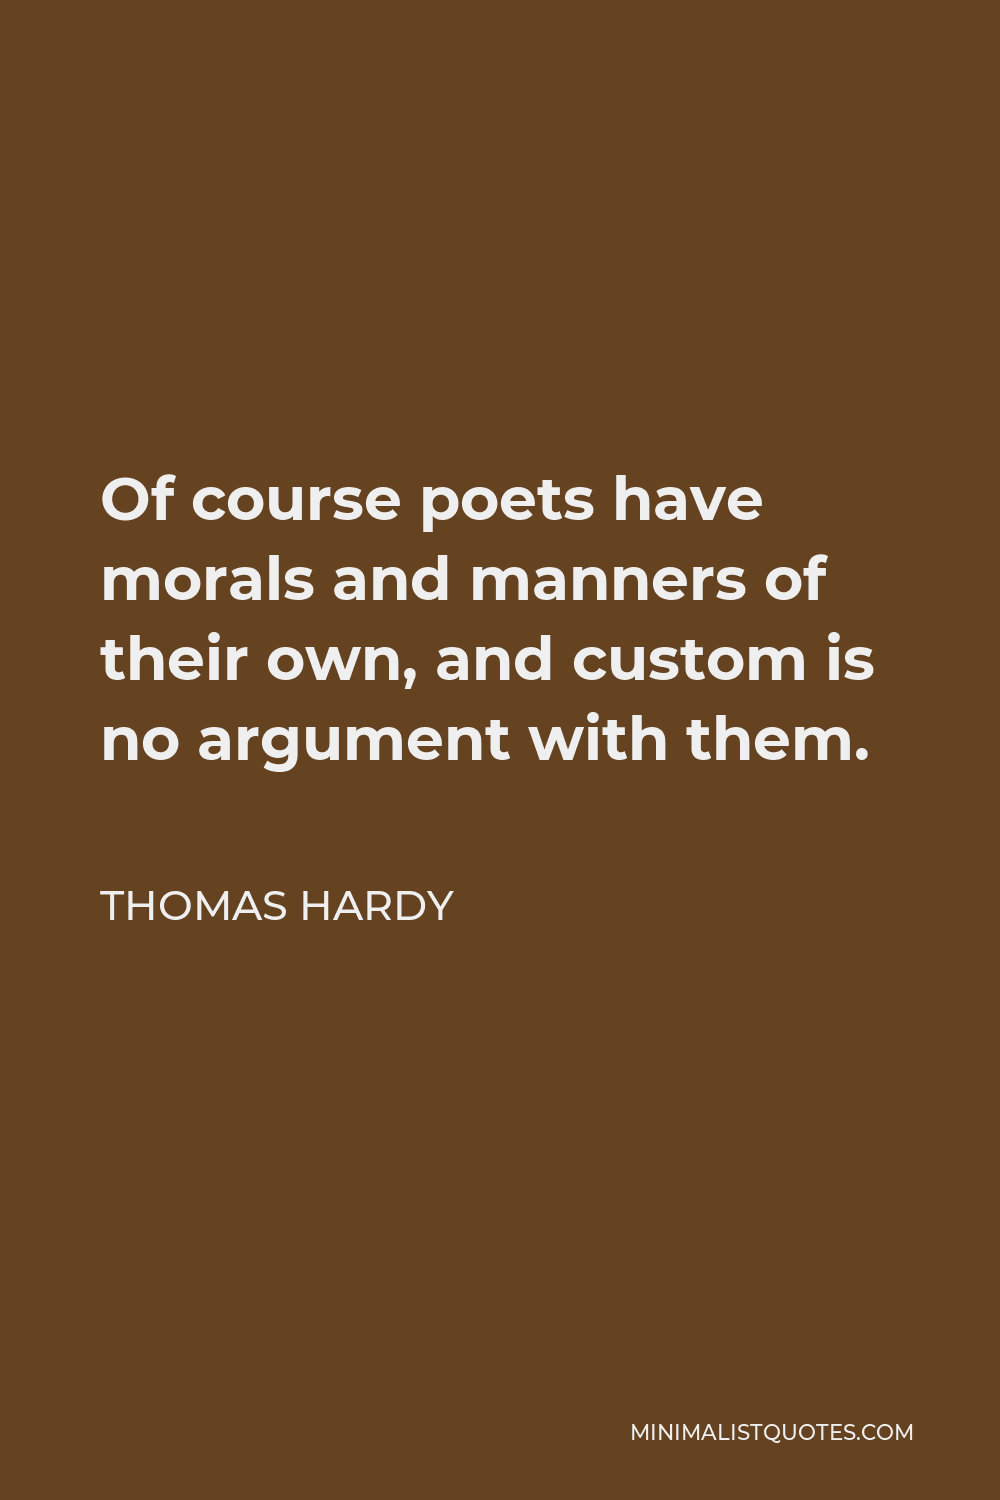 Thomas Hardy Quote - Of course poets have morals and manners of their own, and custom is no argument with them.